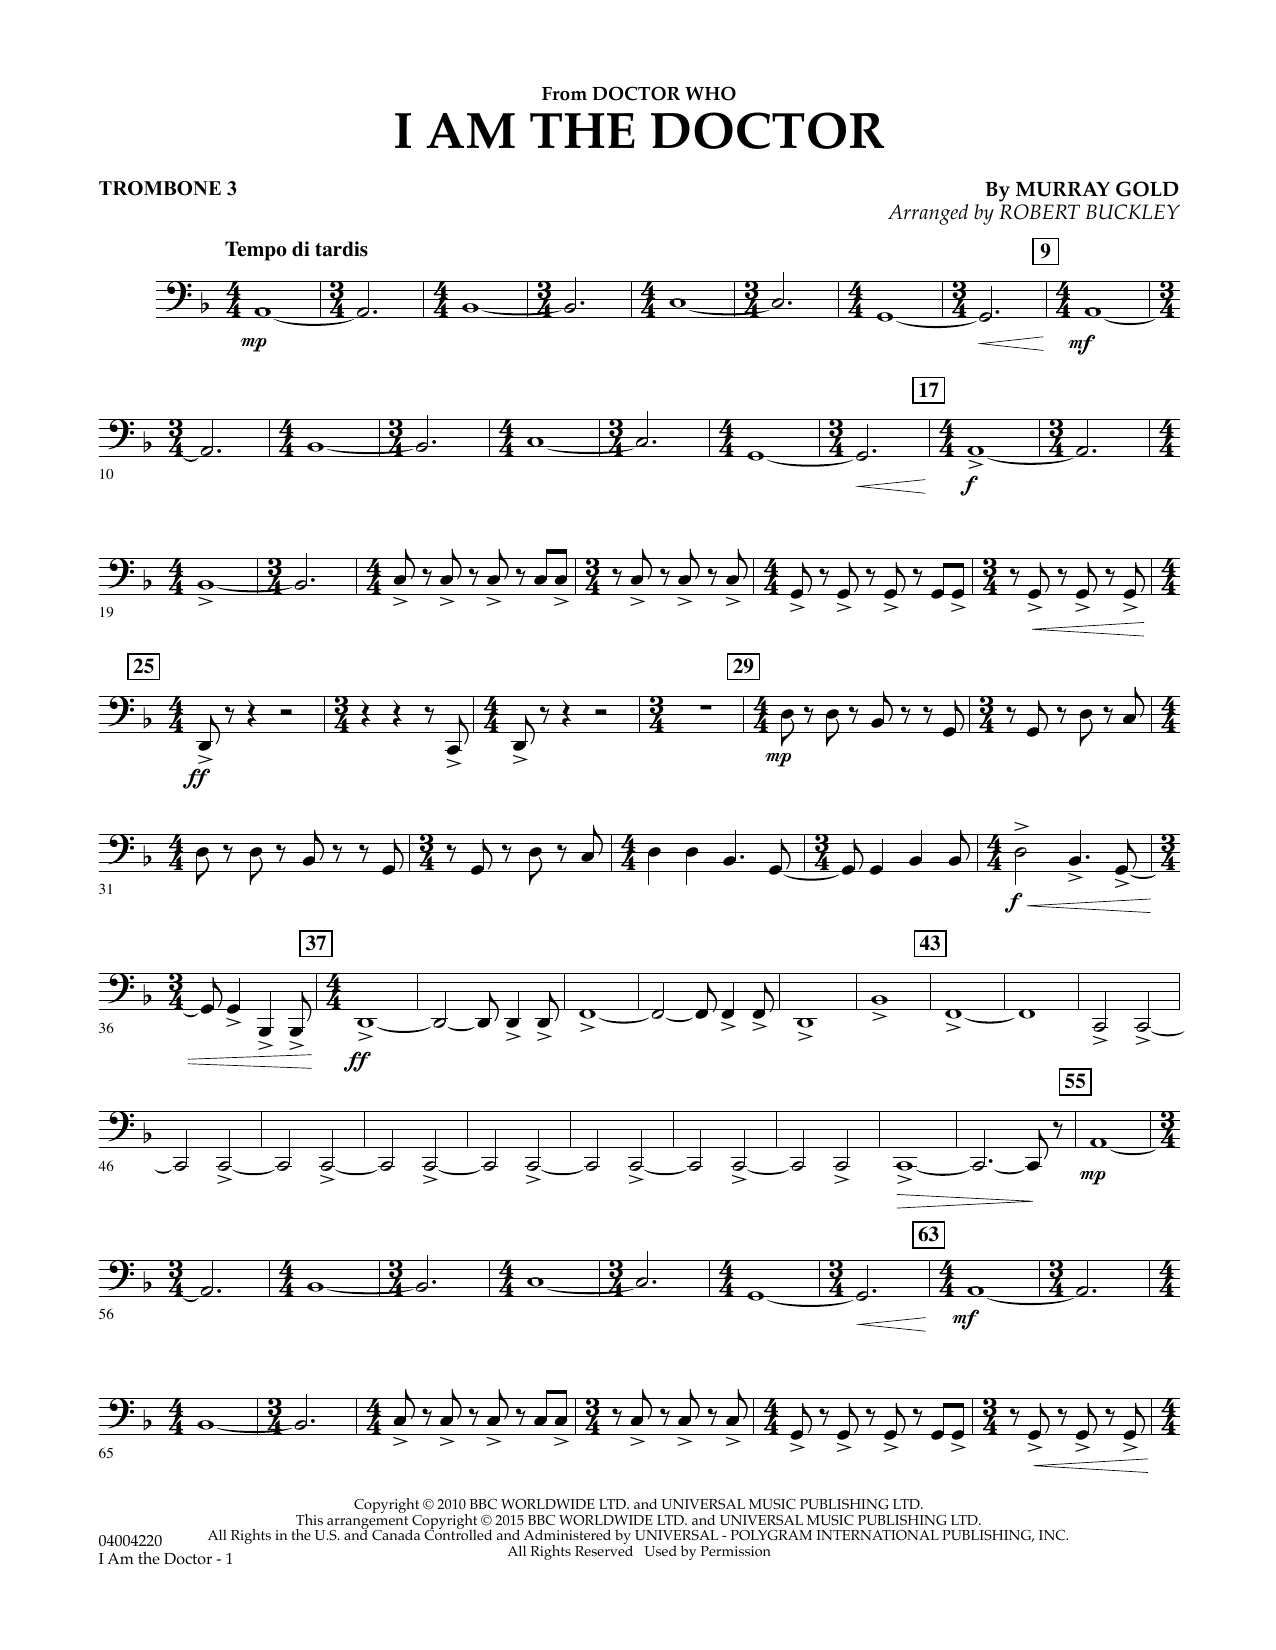 Robert Buckley I Am the Doctor (from Doctor Who) - Trombone 3 sheet music notes and chords. Download Printable PDF.